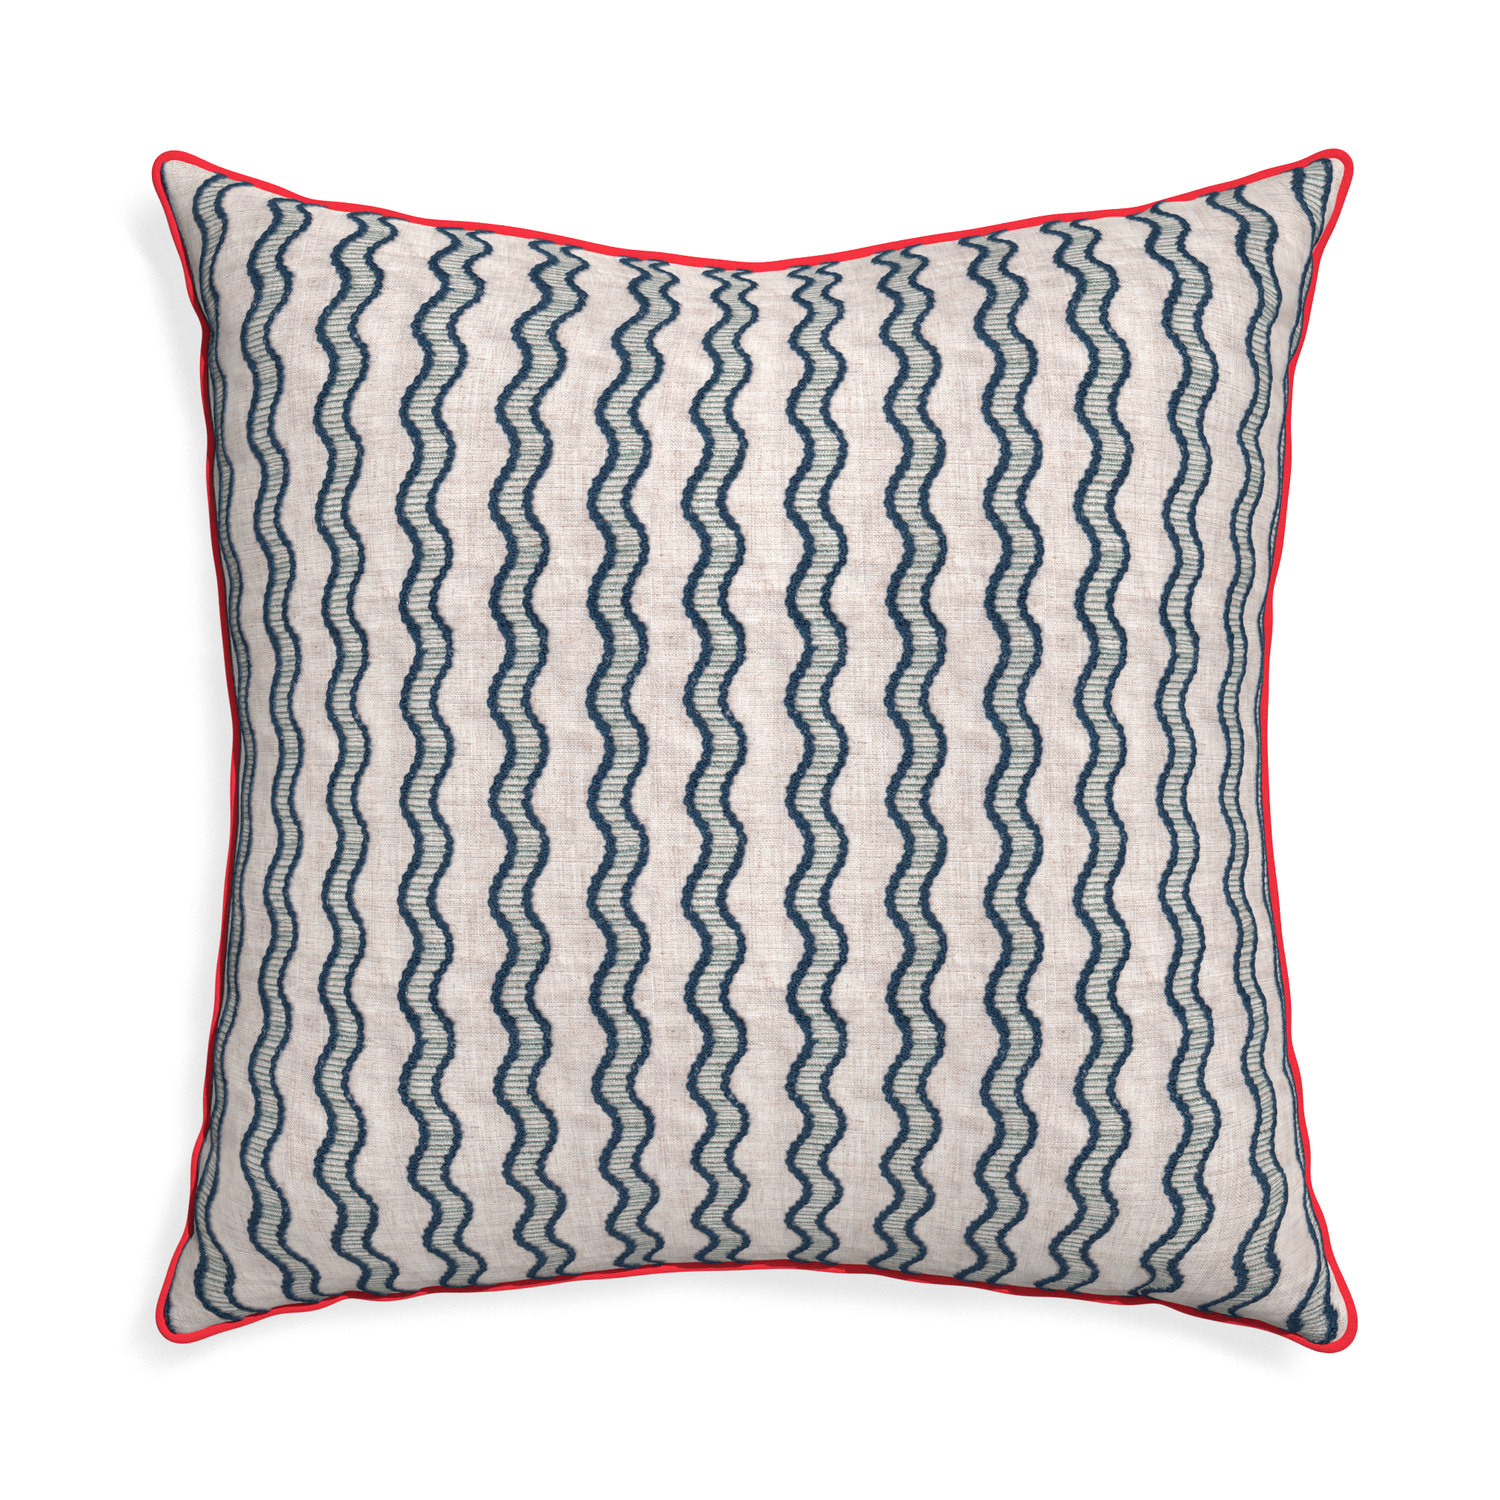 Euro-sham beatrice custom embroidered wavepillow with cherry piping on white background